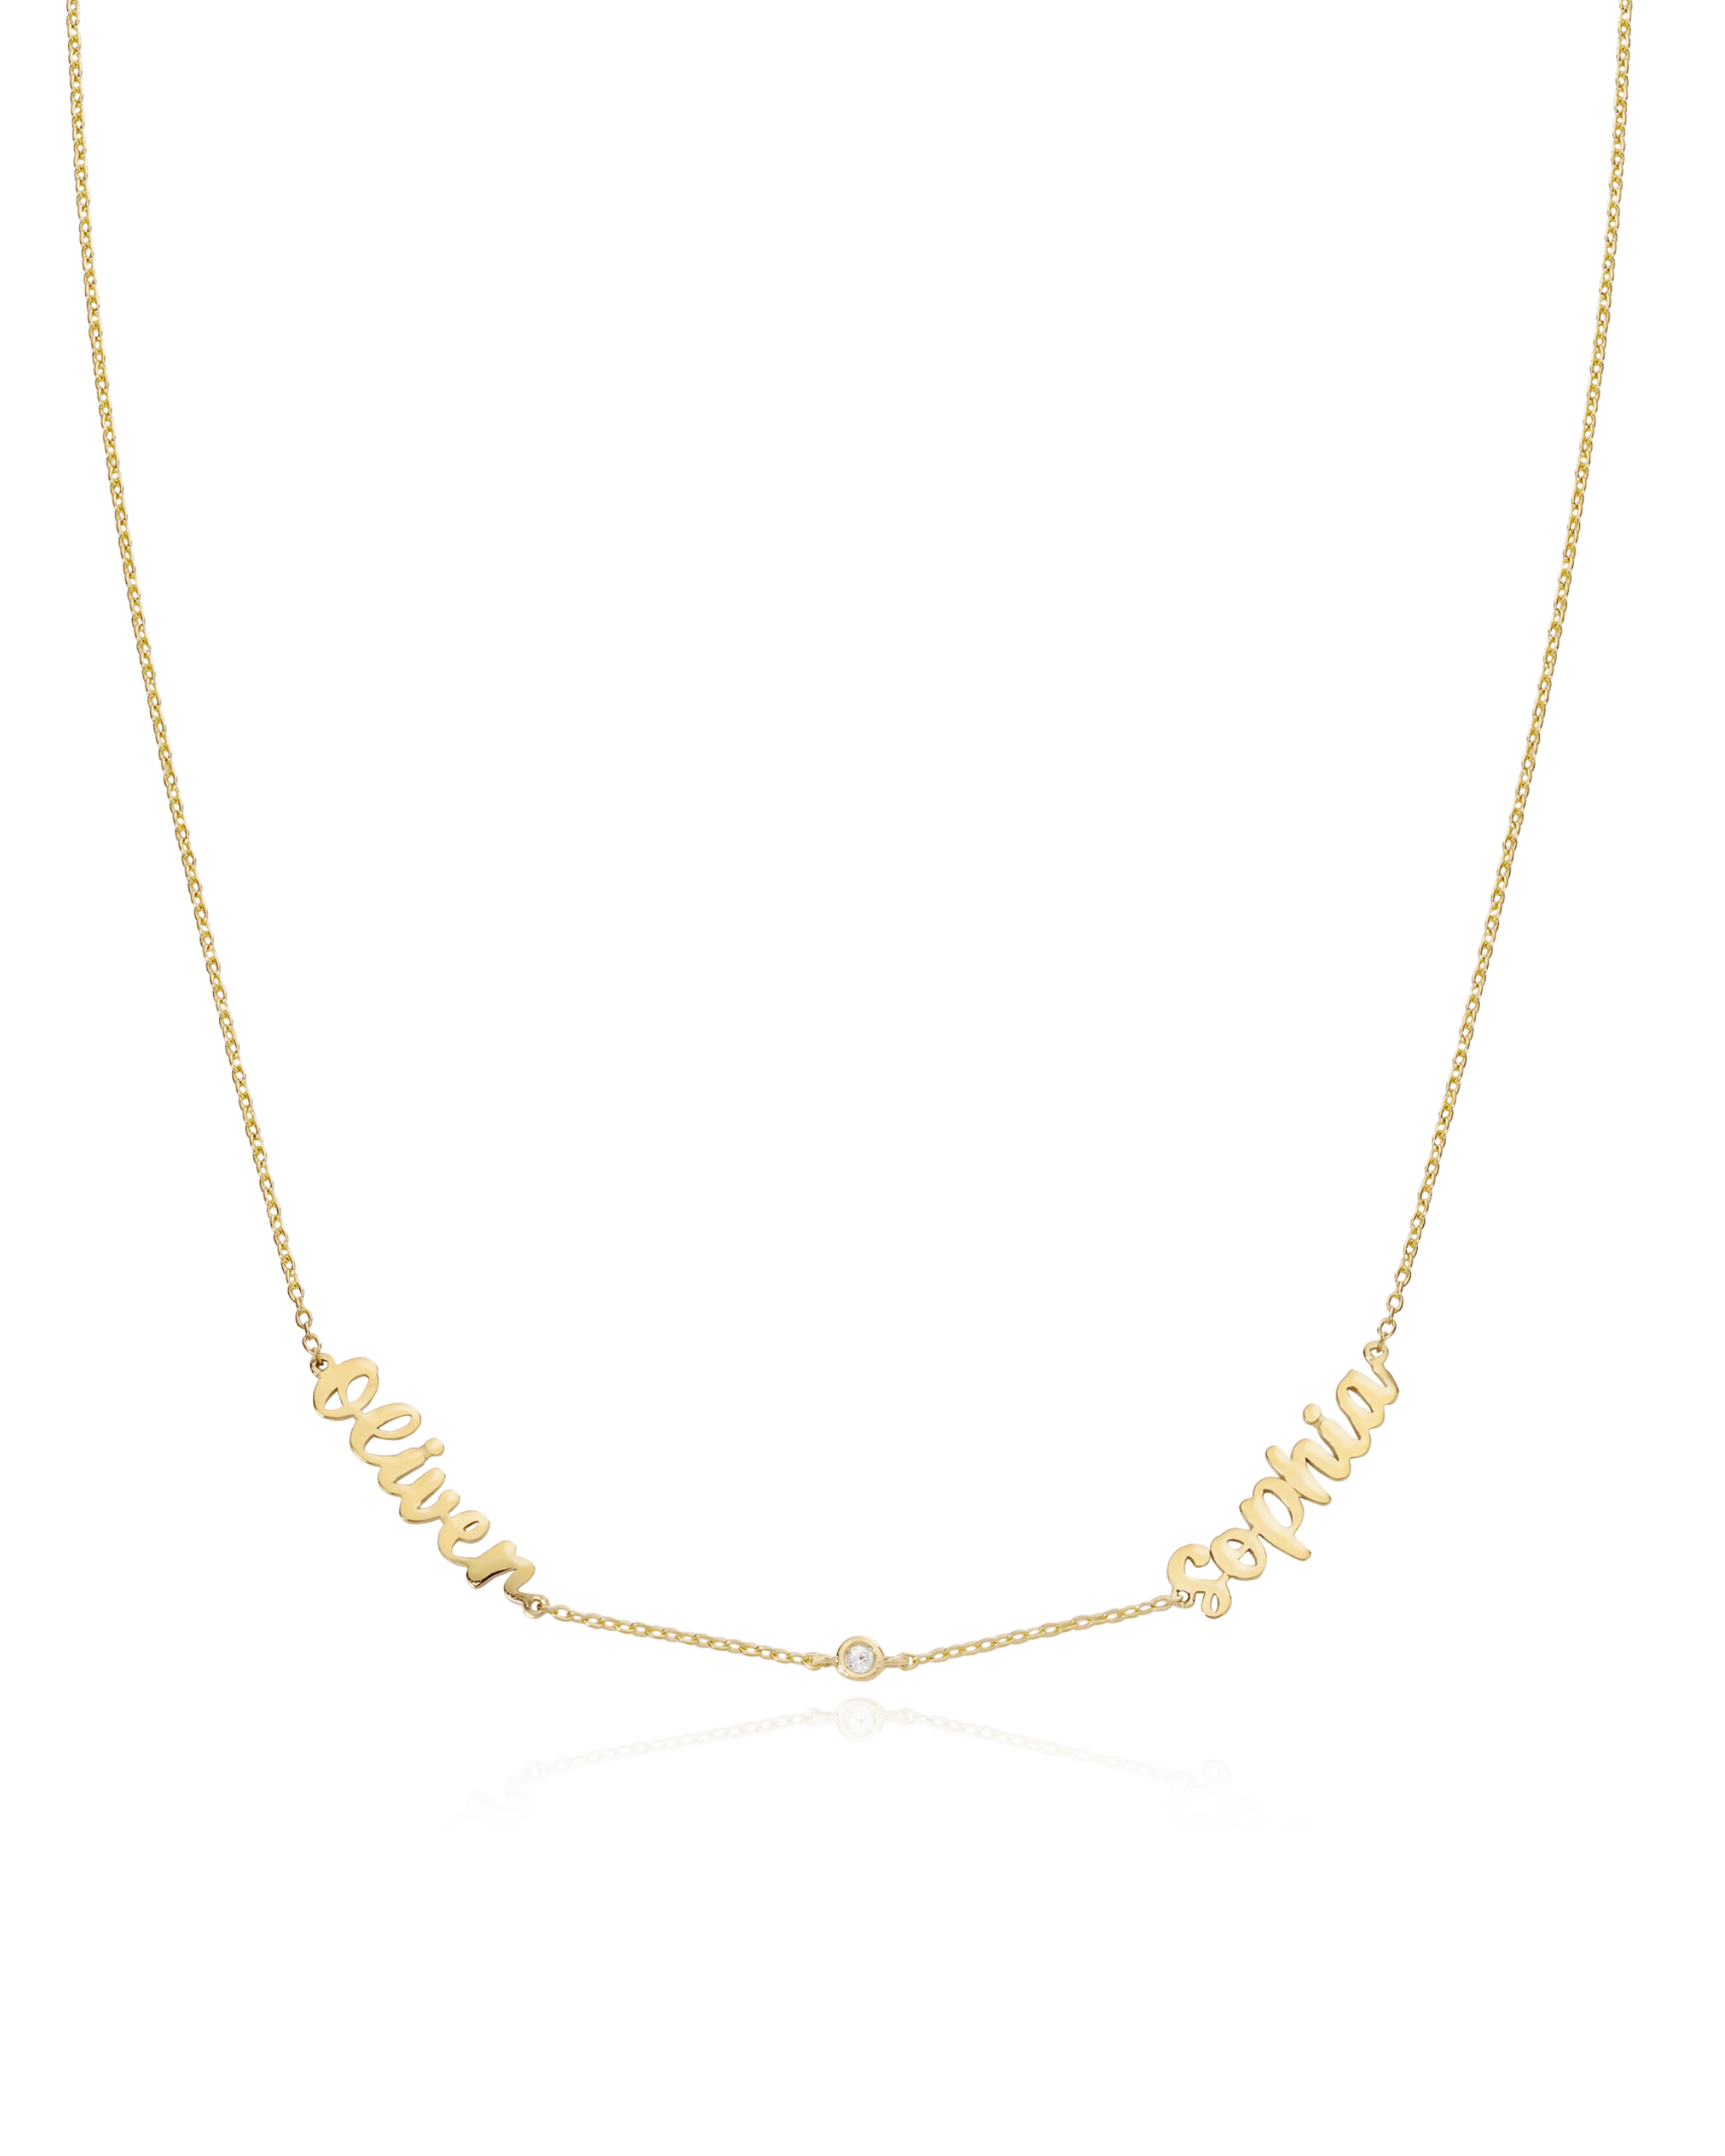 Name Necklace with Diamonds - 18K Gold Vermeil Necklaces magal-dev 